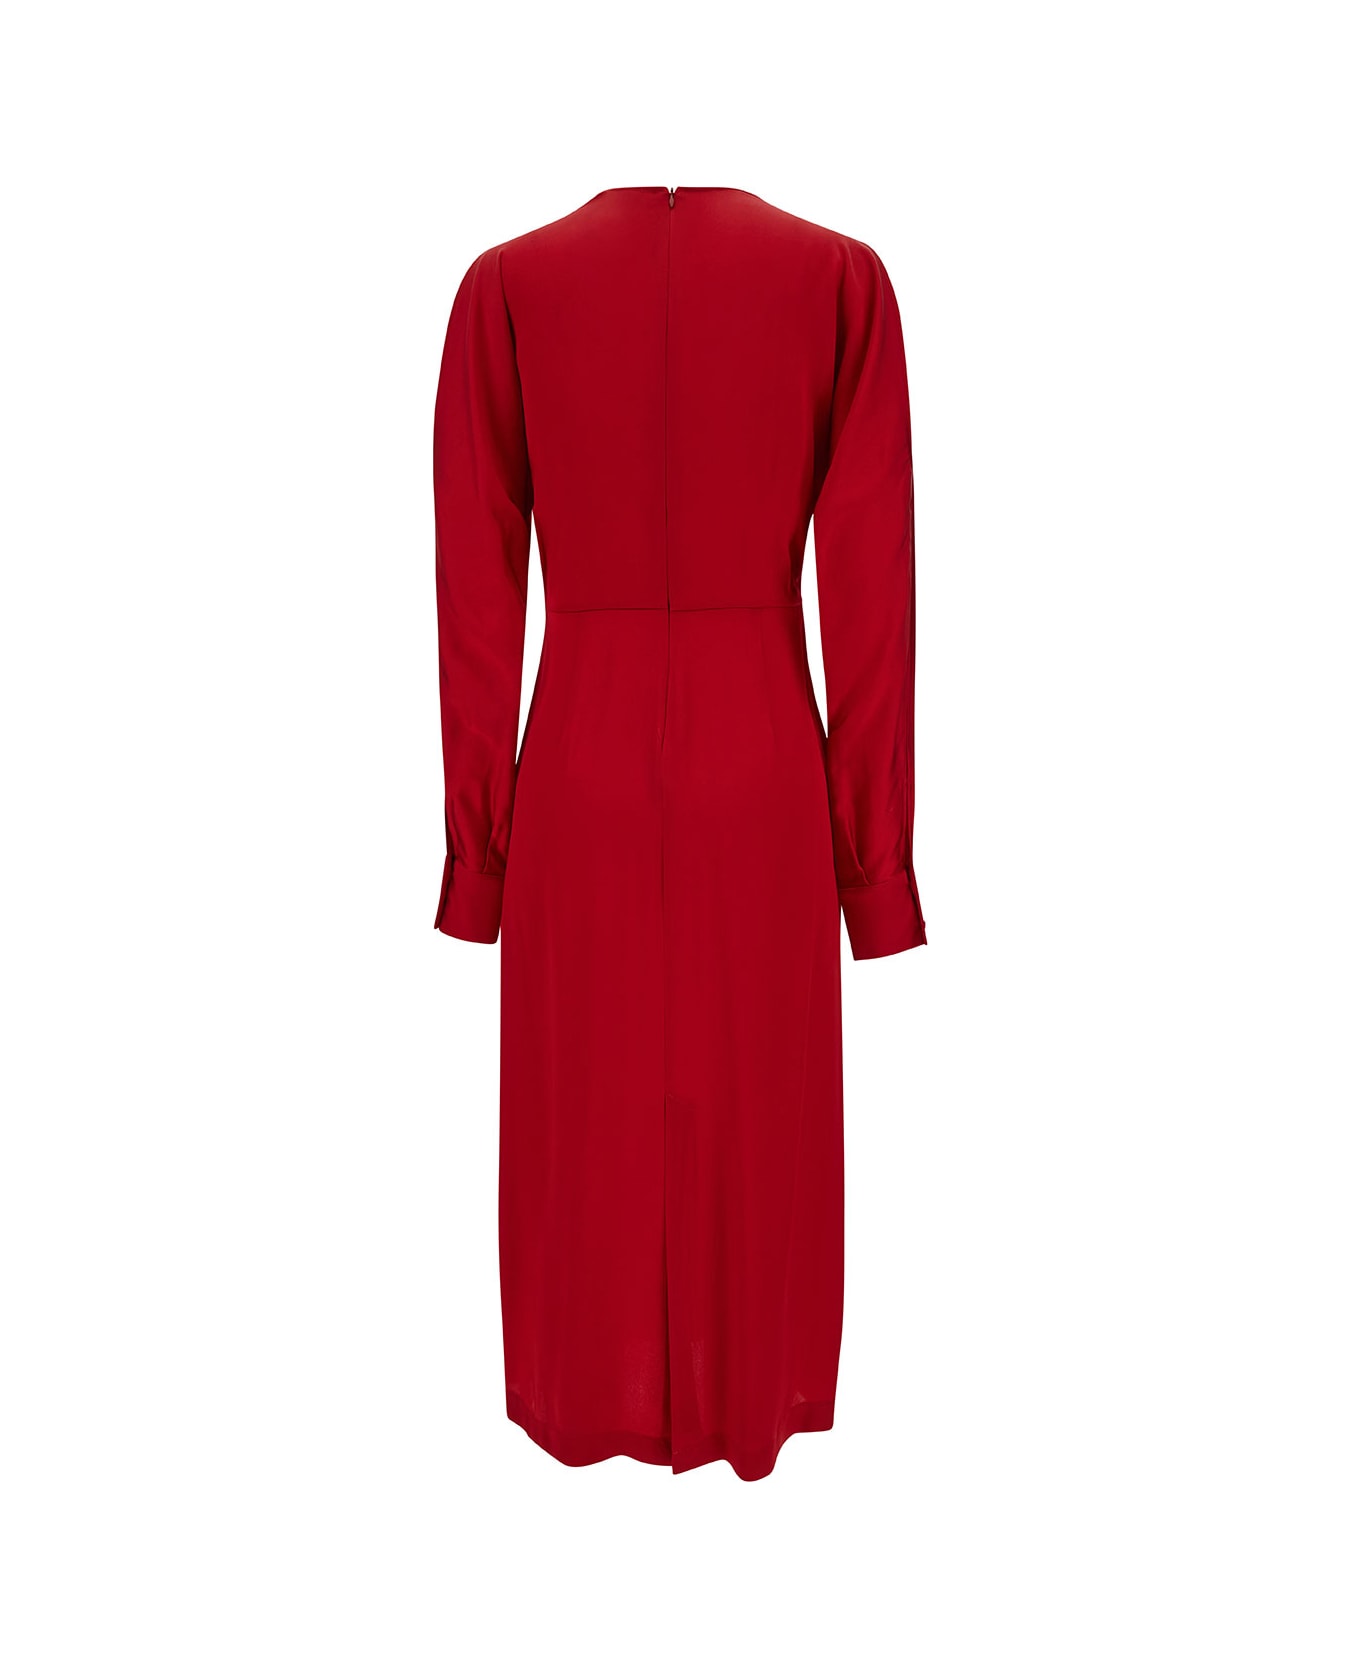 SEMICOUTURE Midi Red V Neck Dress With Long Sleeve In Acetate And Silk Blend Woman - Red